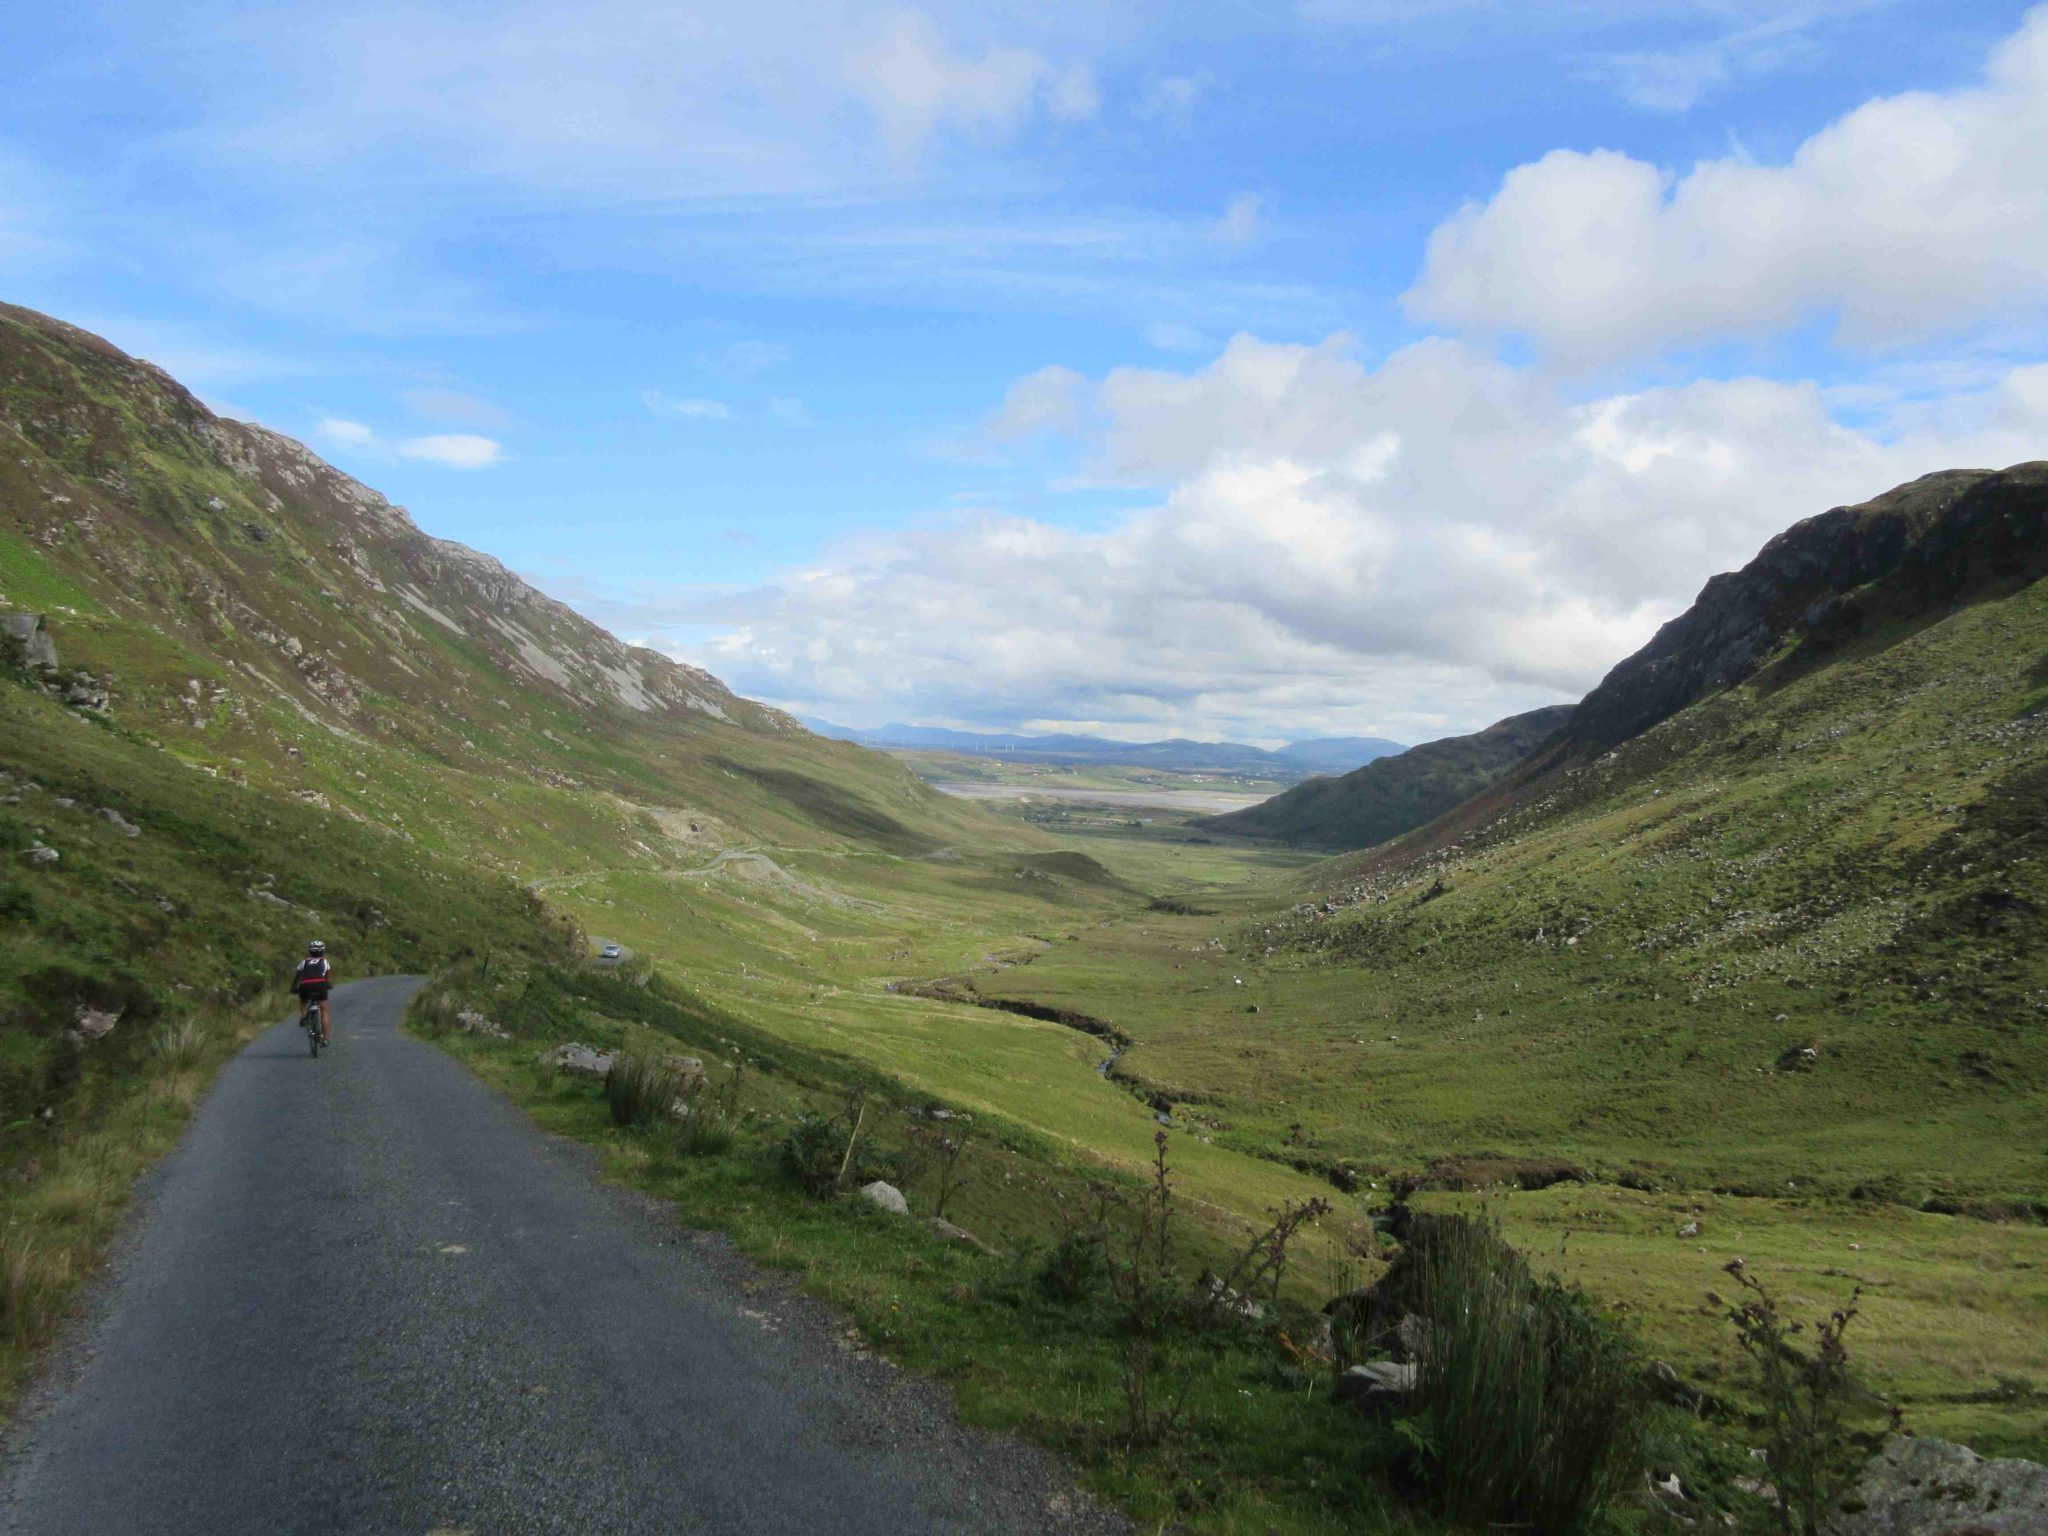 Biking down Granny Pass in South-West Donegal